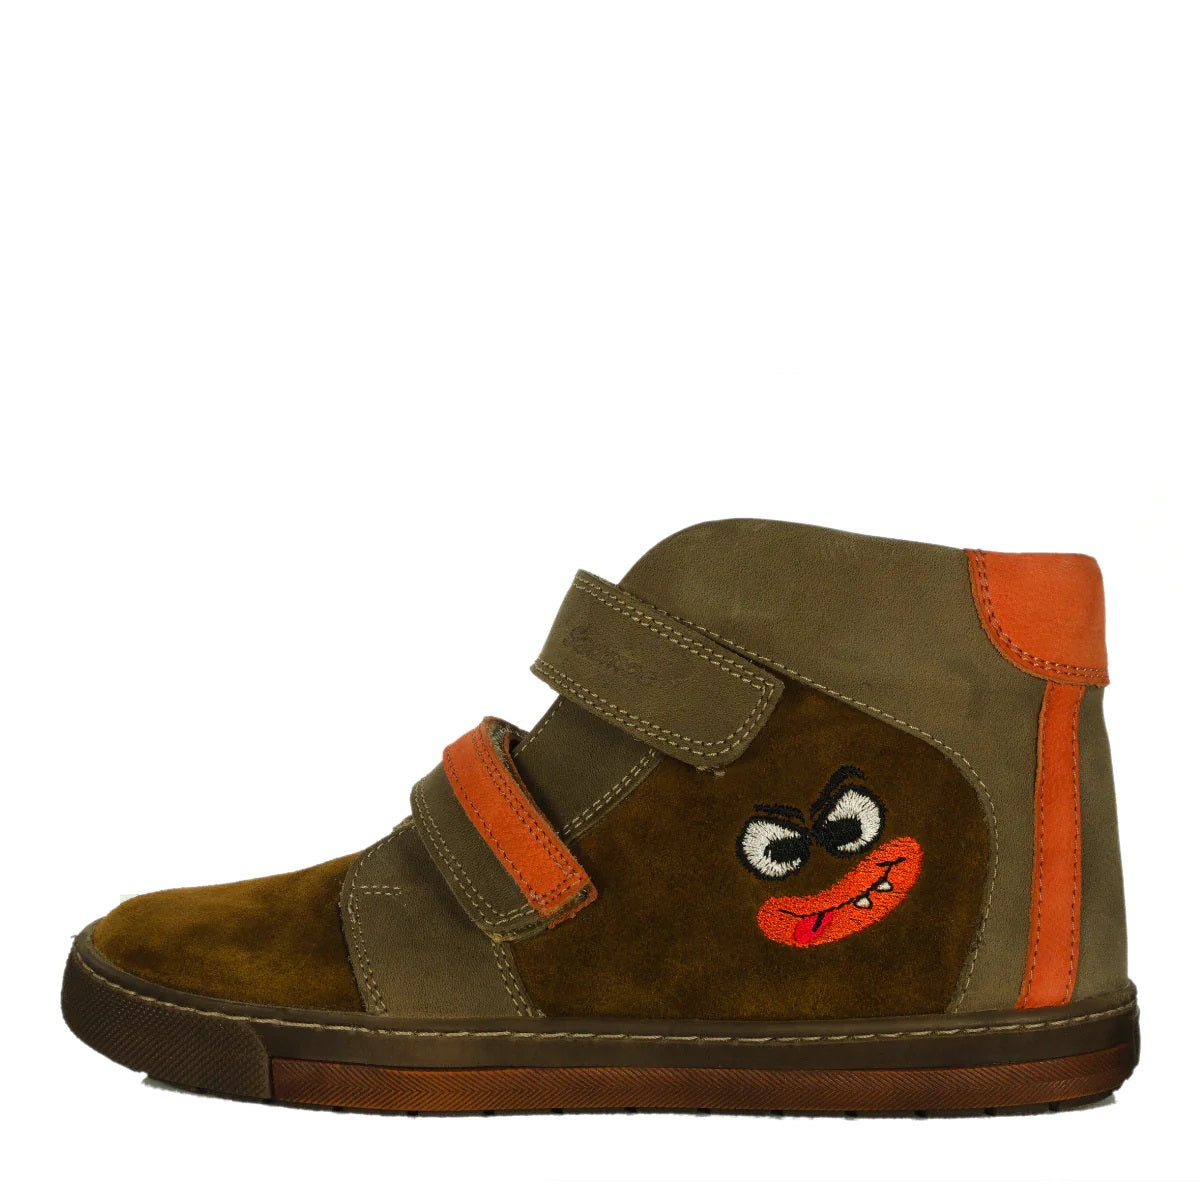 Szamos kid boy high-top shoes brown with orange monster face big kid size